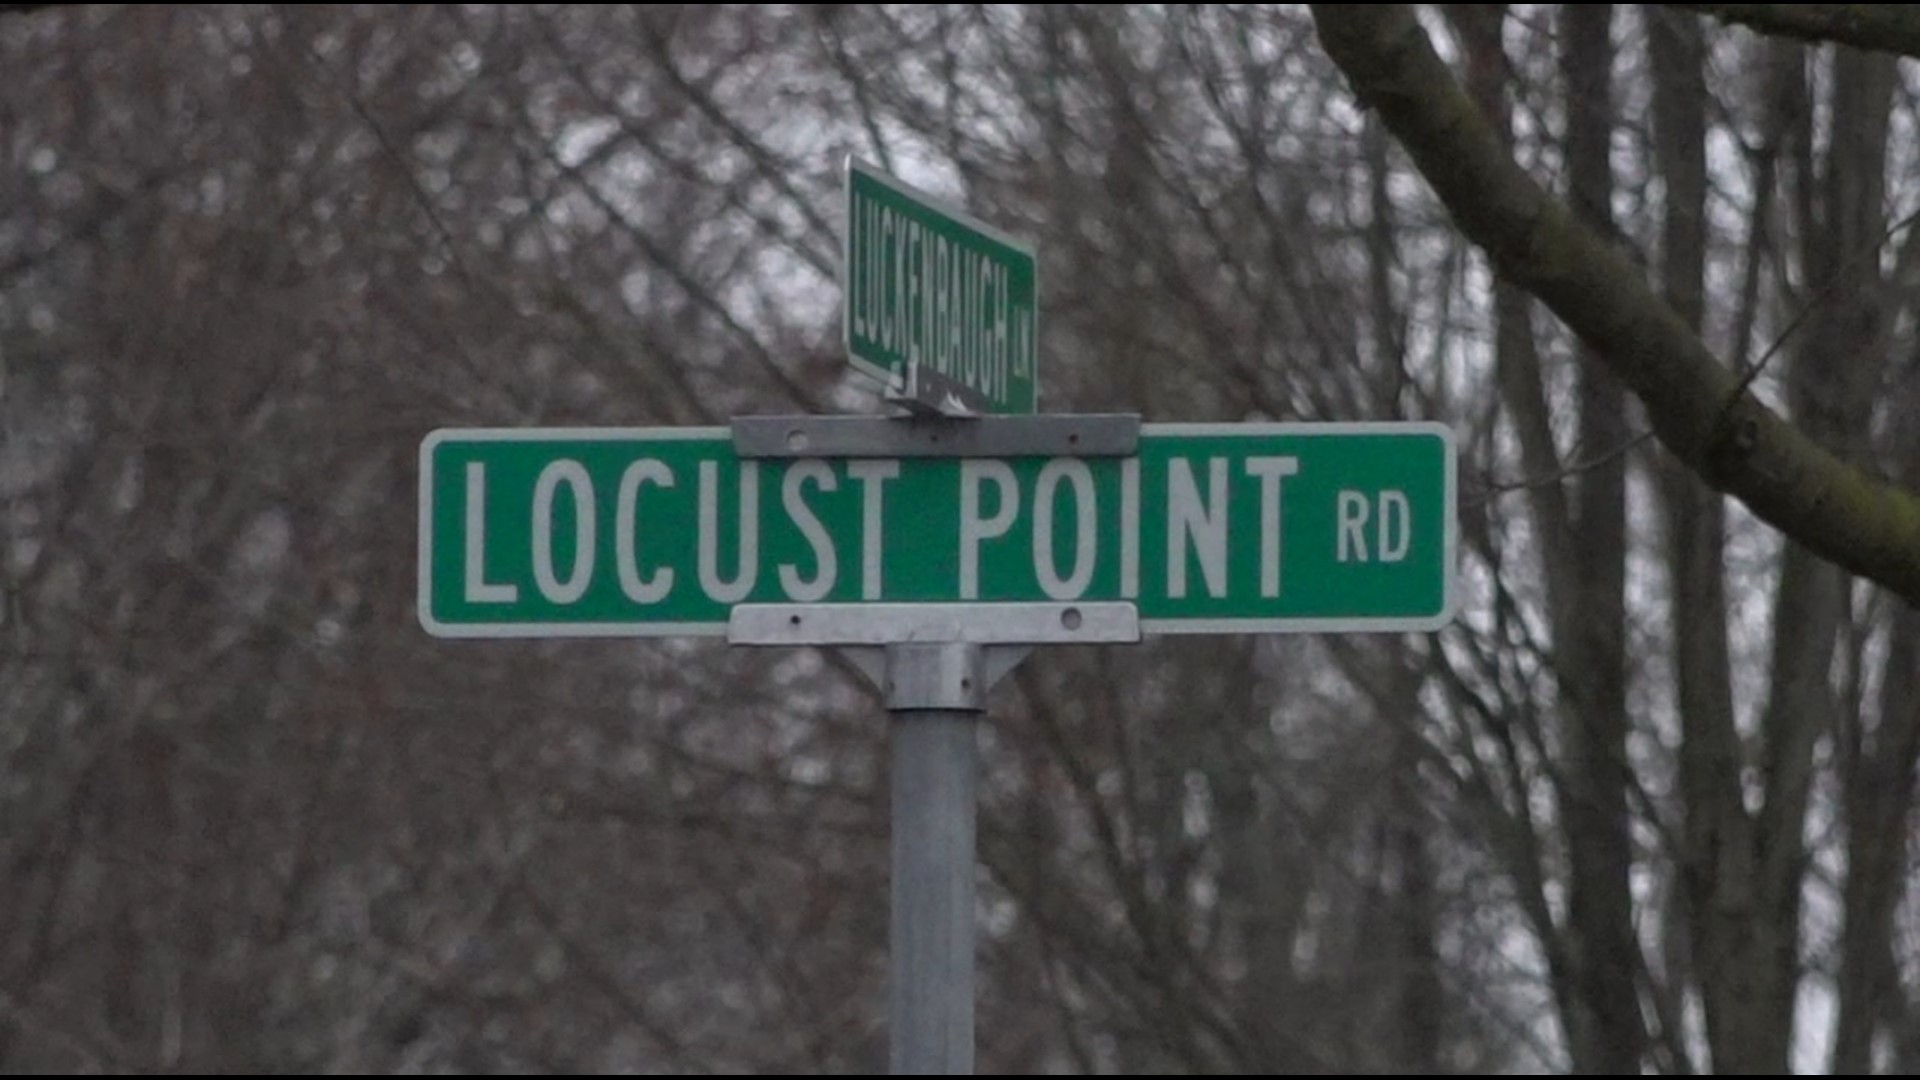 Locust Point Road in Conewago Township has numerous signs banning large trucks, but they go largely ignored.